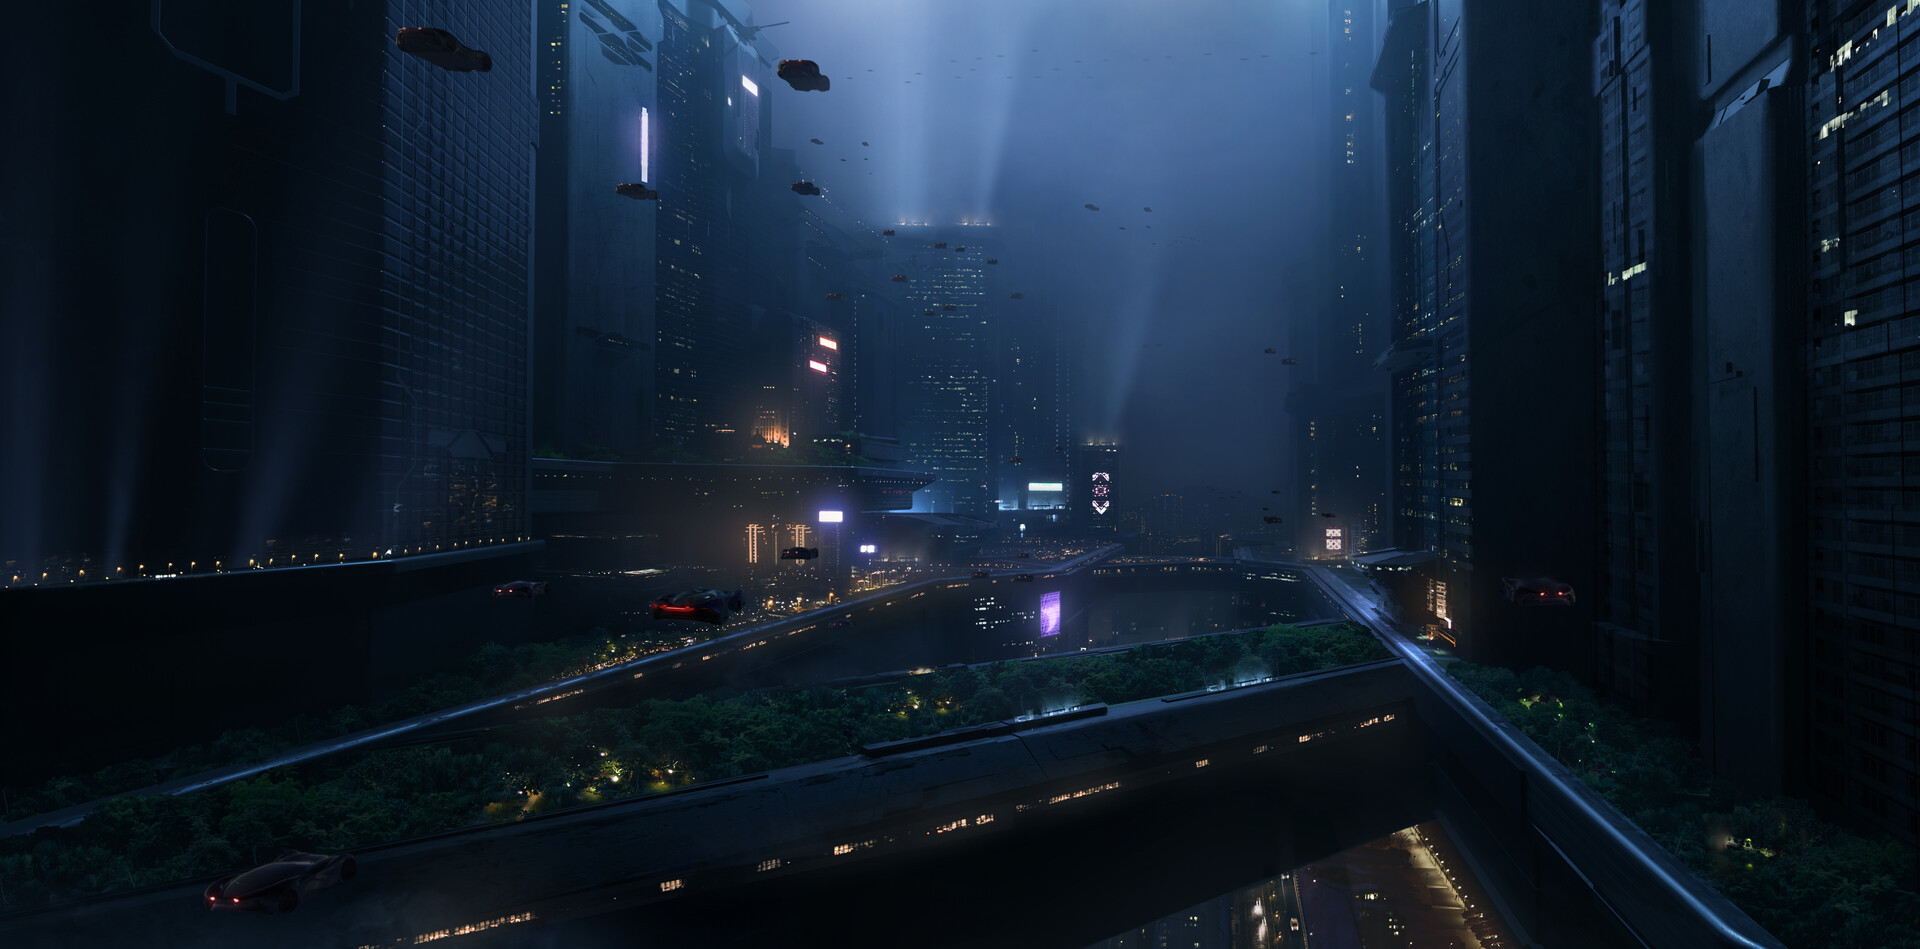 art of a dark, futuristic city, with ships whizzing by skyscrapers